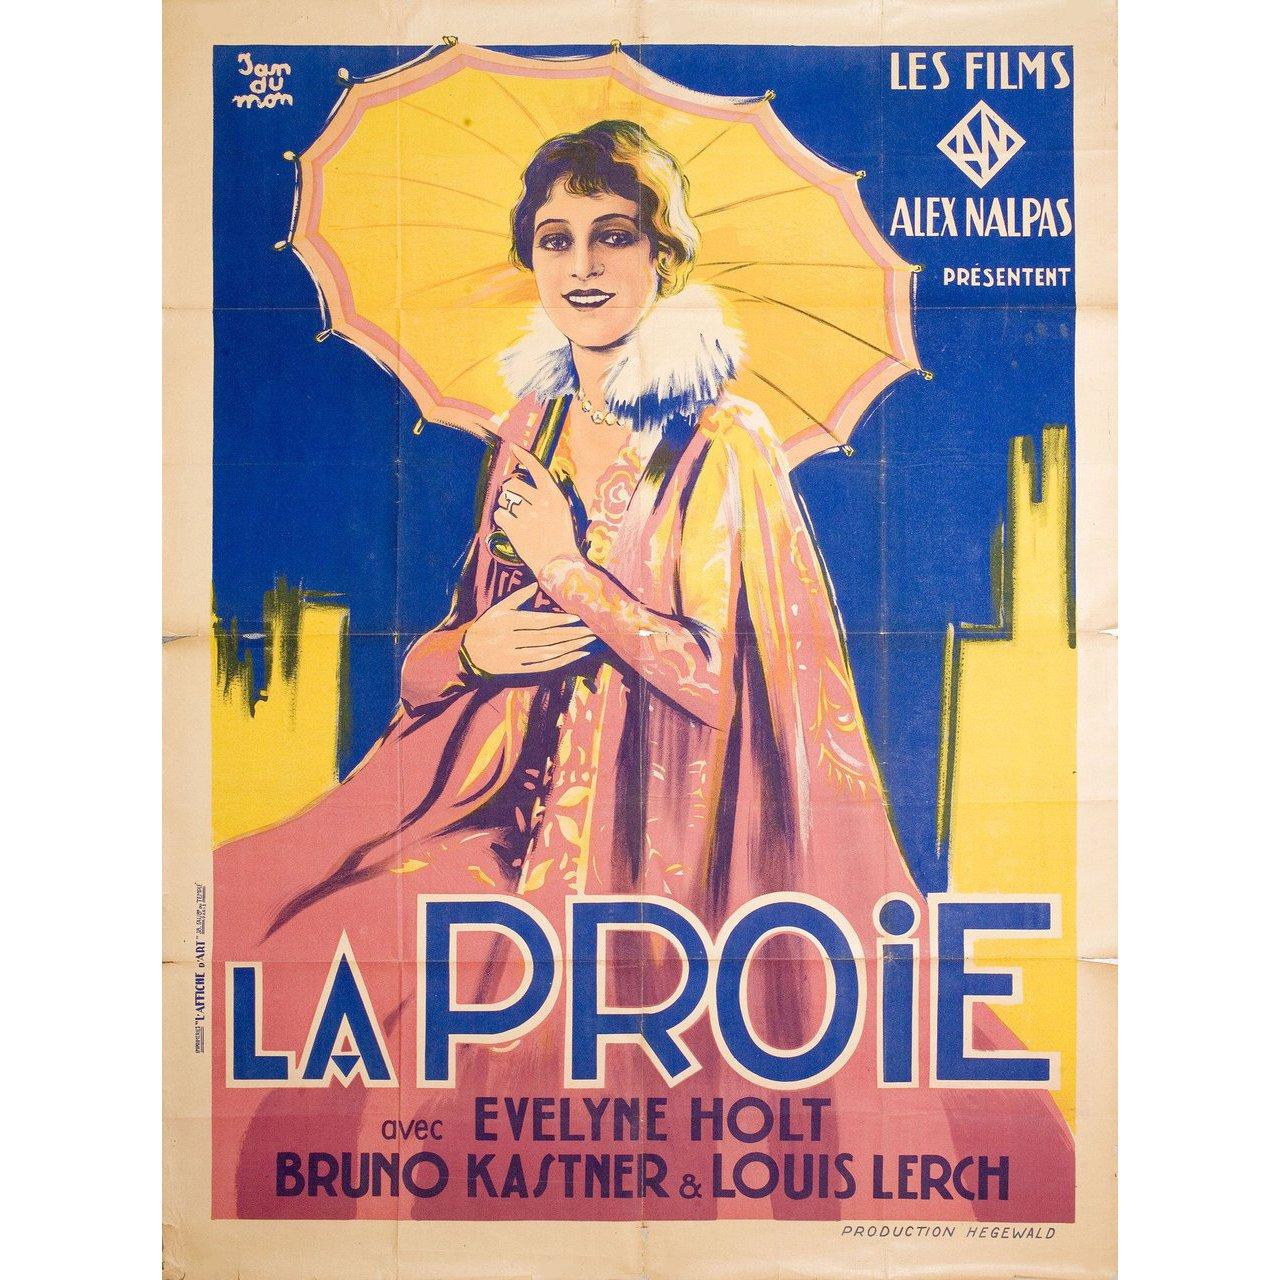 Original 1928 French Grande poster by Jan Du Mon for. Fair-good condition, folded. Many original posters were issued folded or were subsequently folded. Please note: the size is stated in inches and the actual size can vary by an inch or